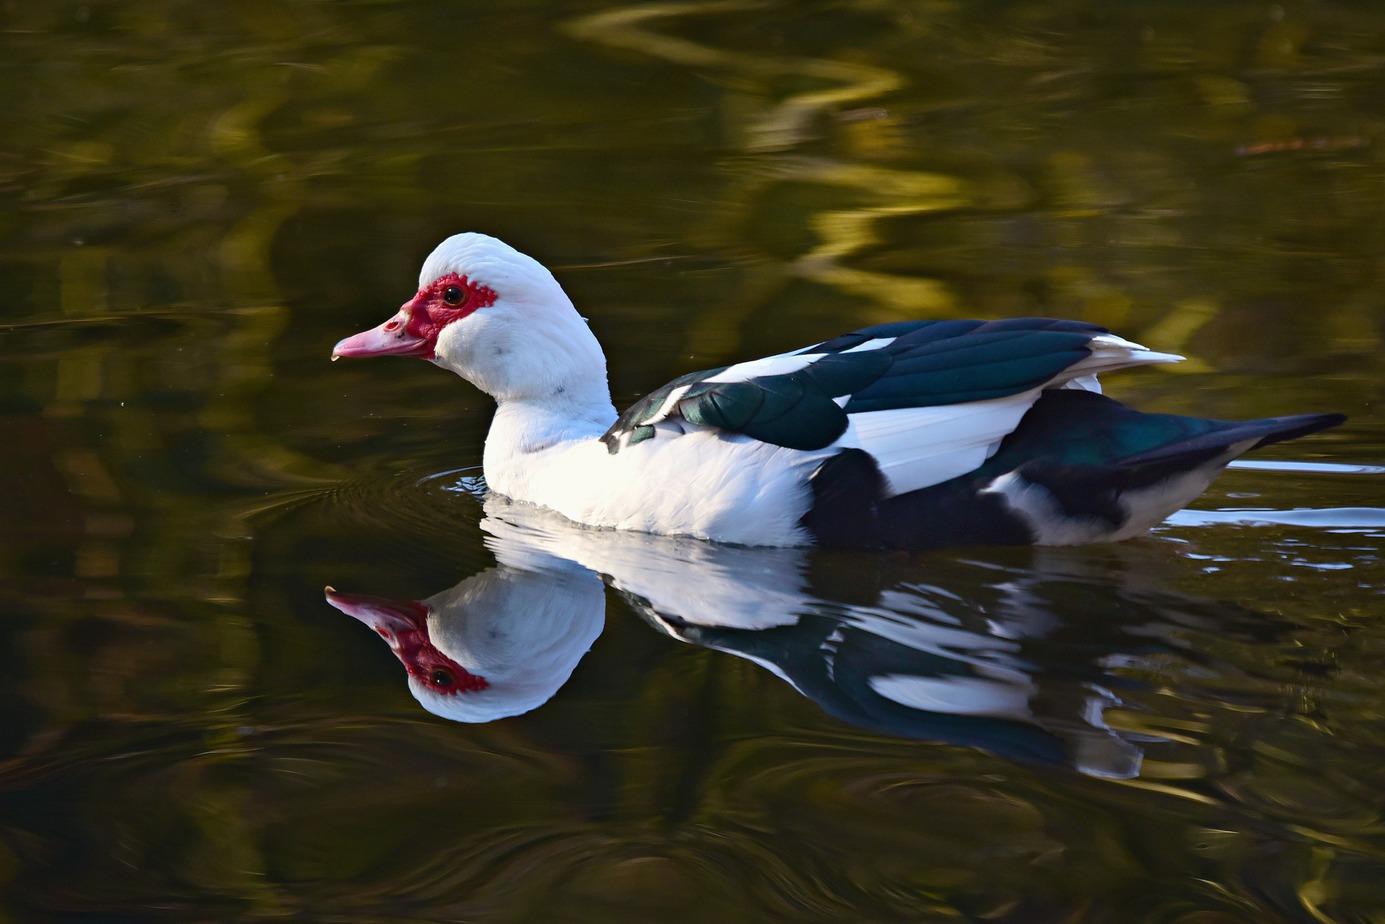 black and white muscovy, swimming in water